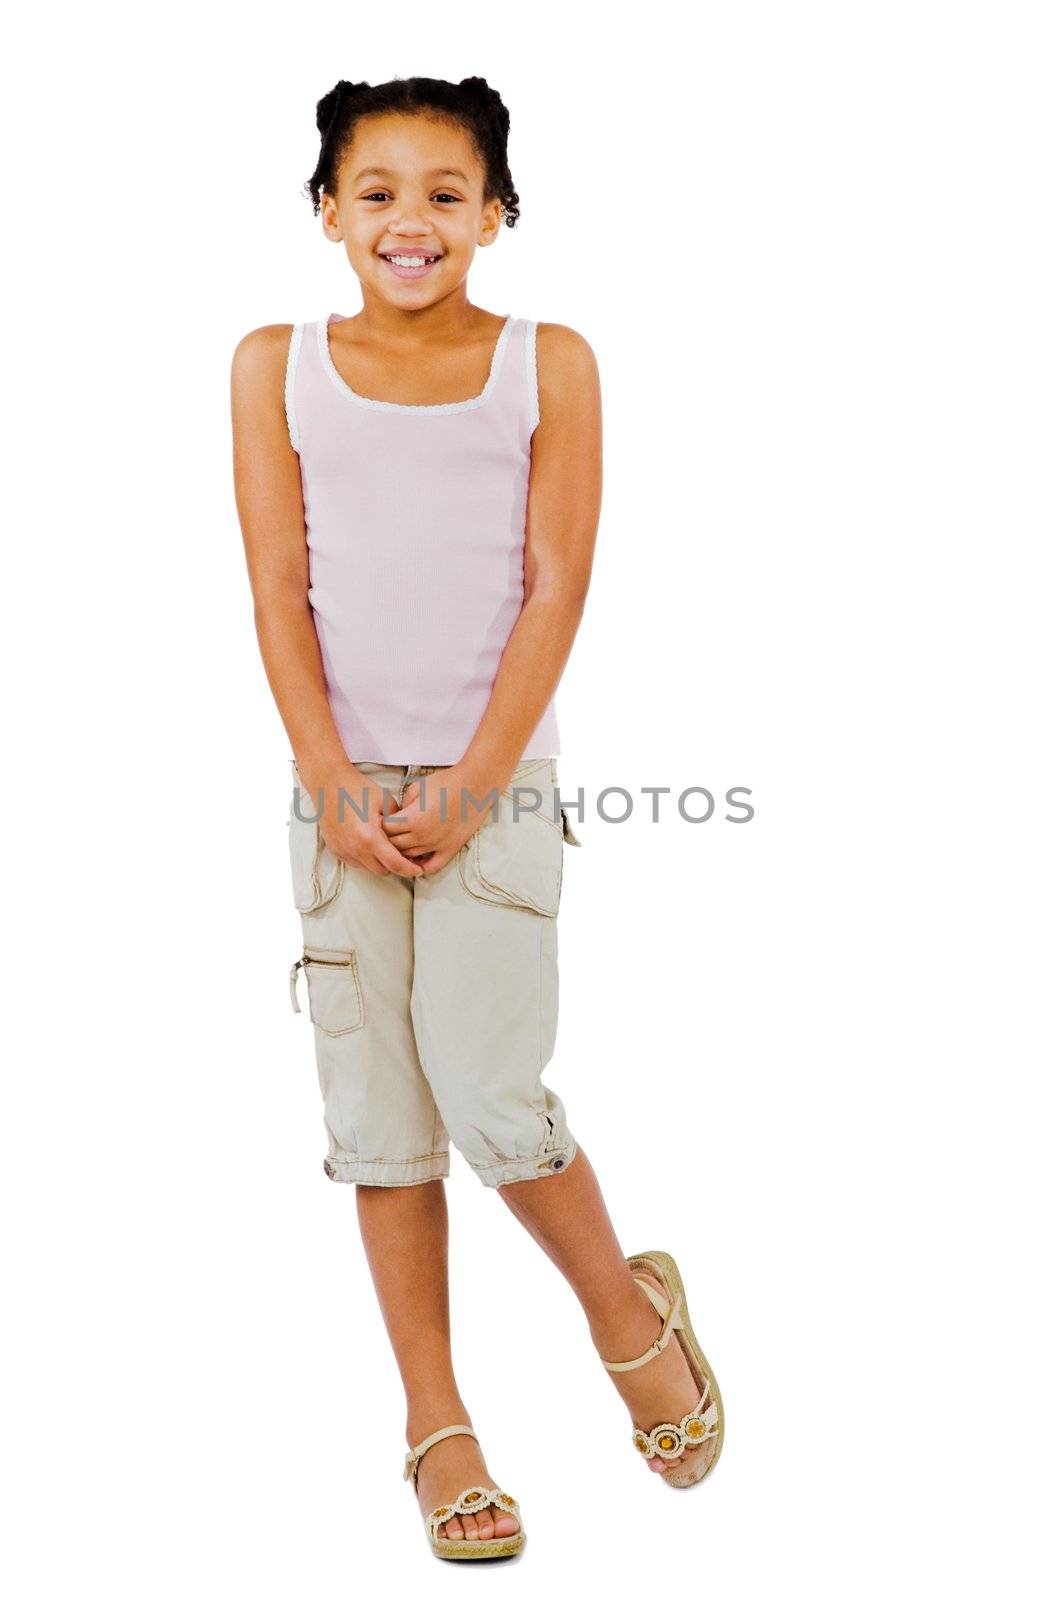 Girl posing and smiling isolated over white